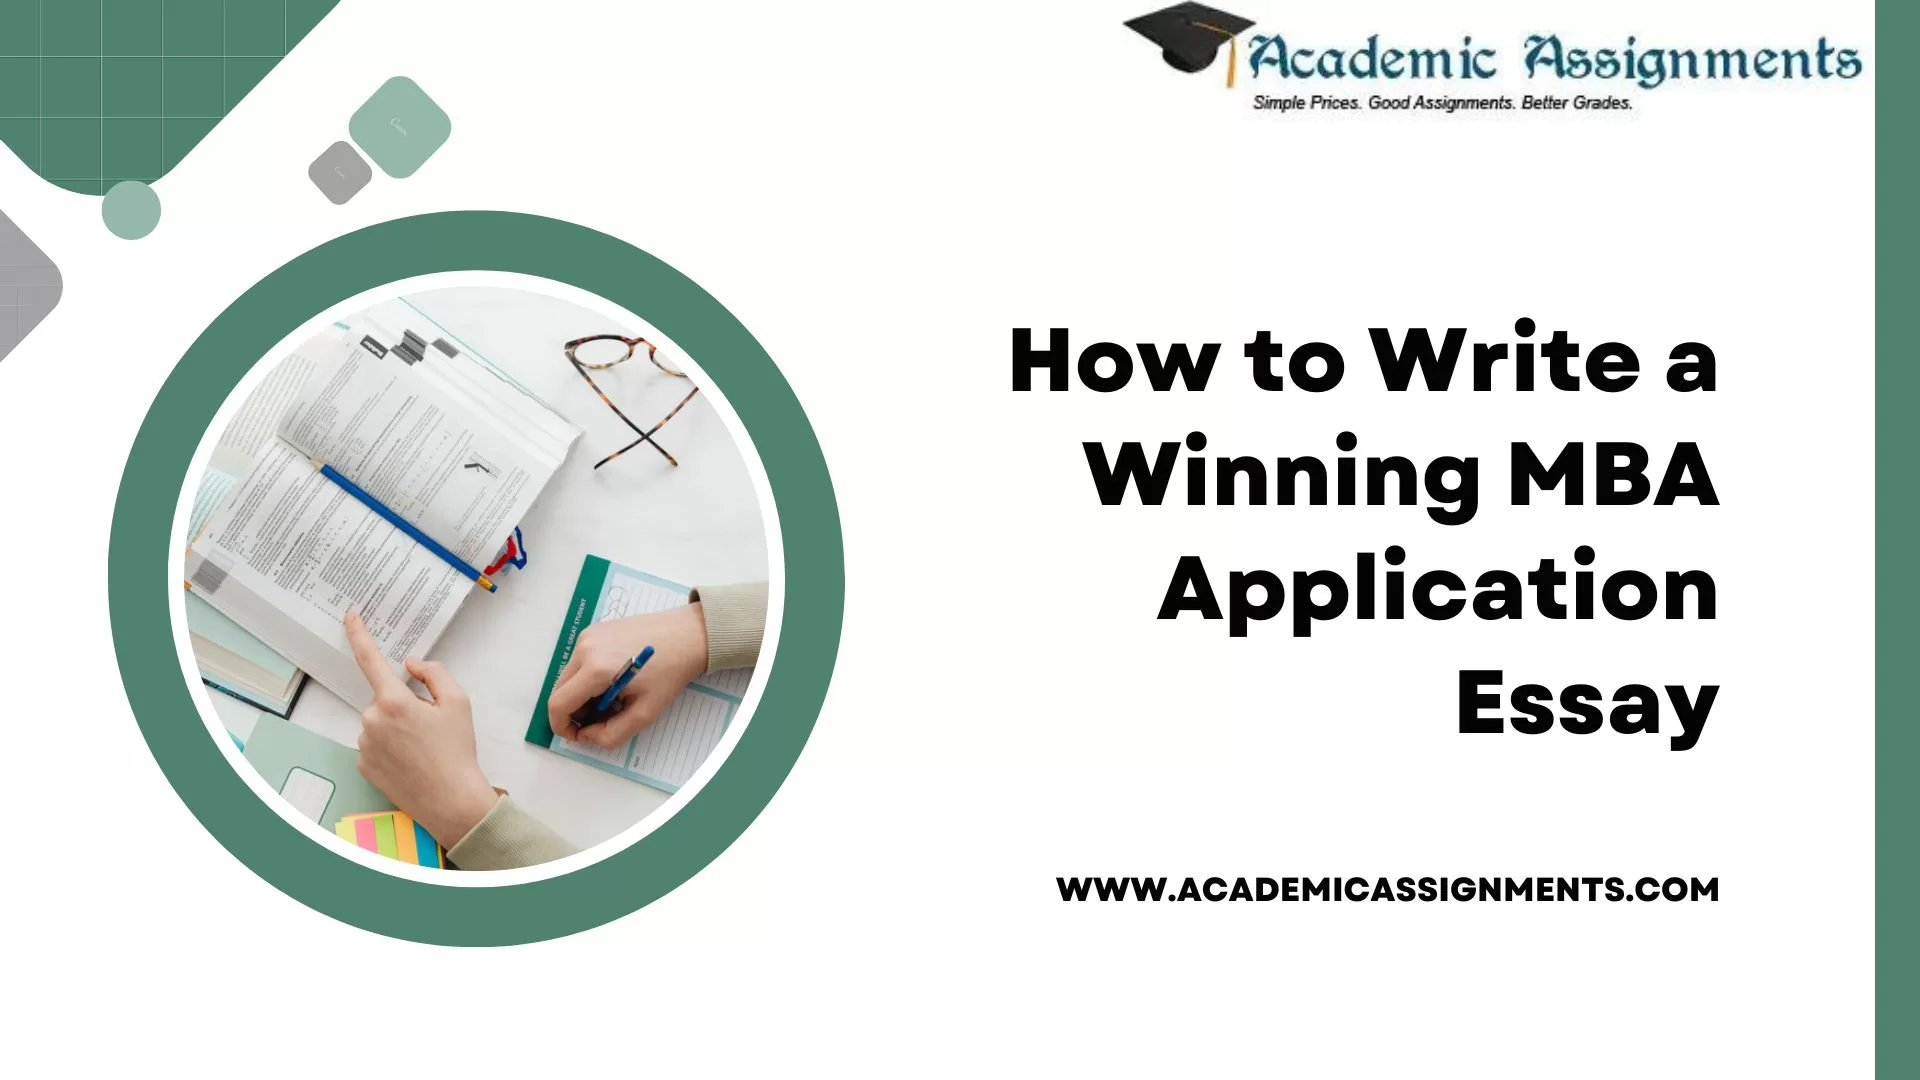 How to Write a Winning MBA Application Essay